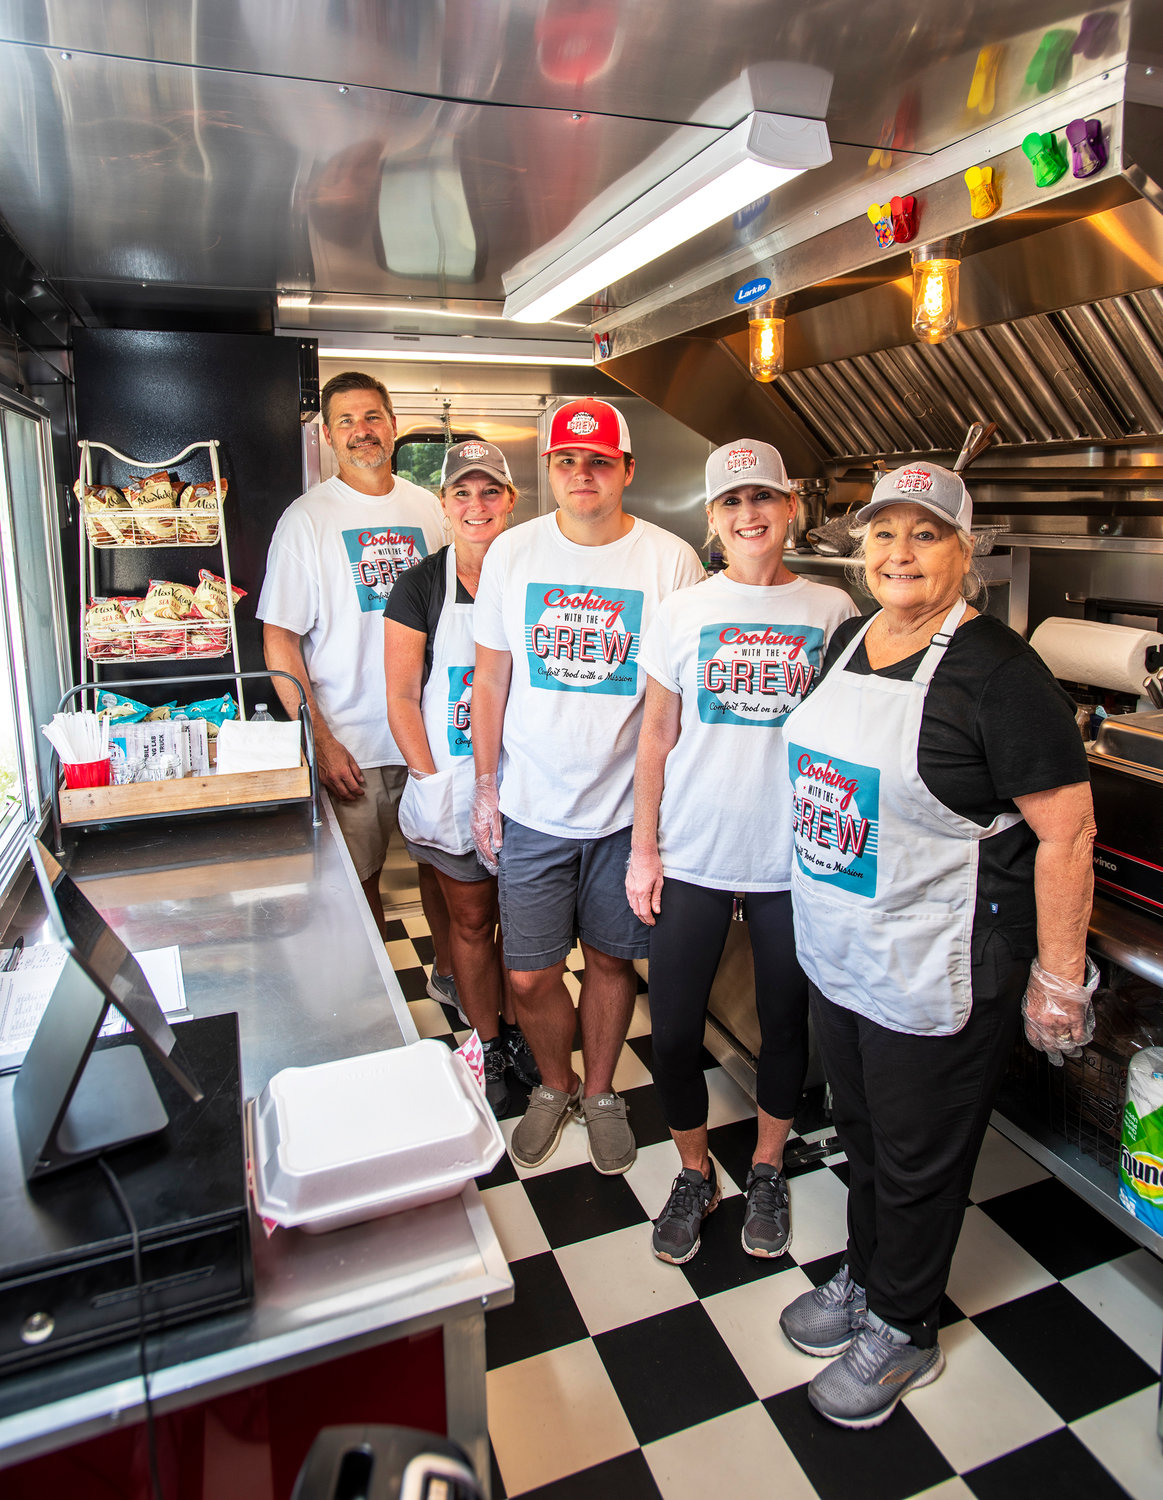 Cooking with the Crew is a mobile training lab, aka food truck. .(L&R) Karl Molnar with his wife Kim and son Miller Molnar, for whom the food truck is named, Karen Horne, Miller's aunt (married to Gary Horne, Kim's brother)and Lisa Horne, Miller's nana (grandmother)